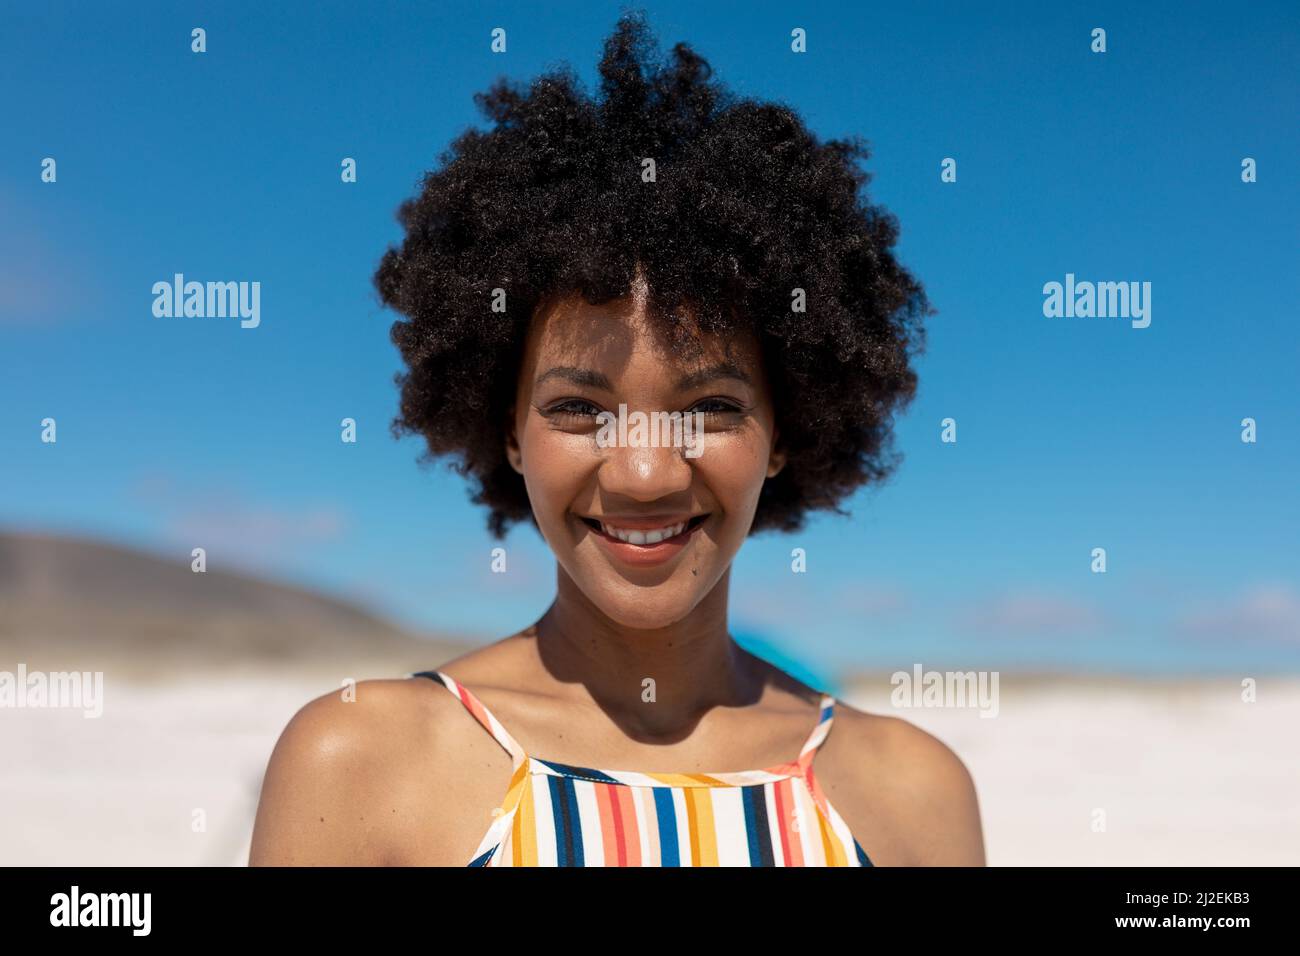 Portrait of smiling african american woman with black afro hair at beach on sunny day Stock Photo